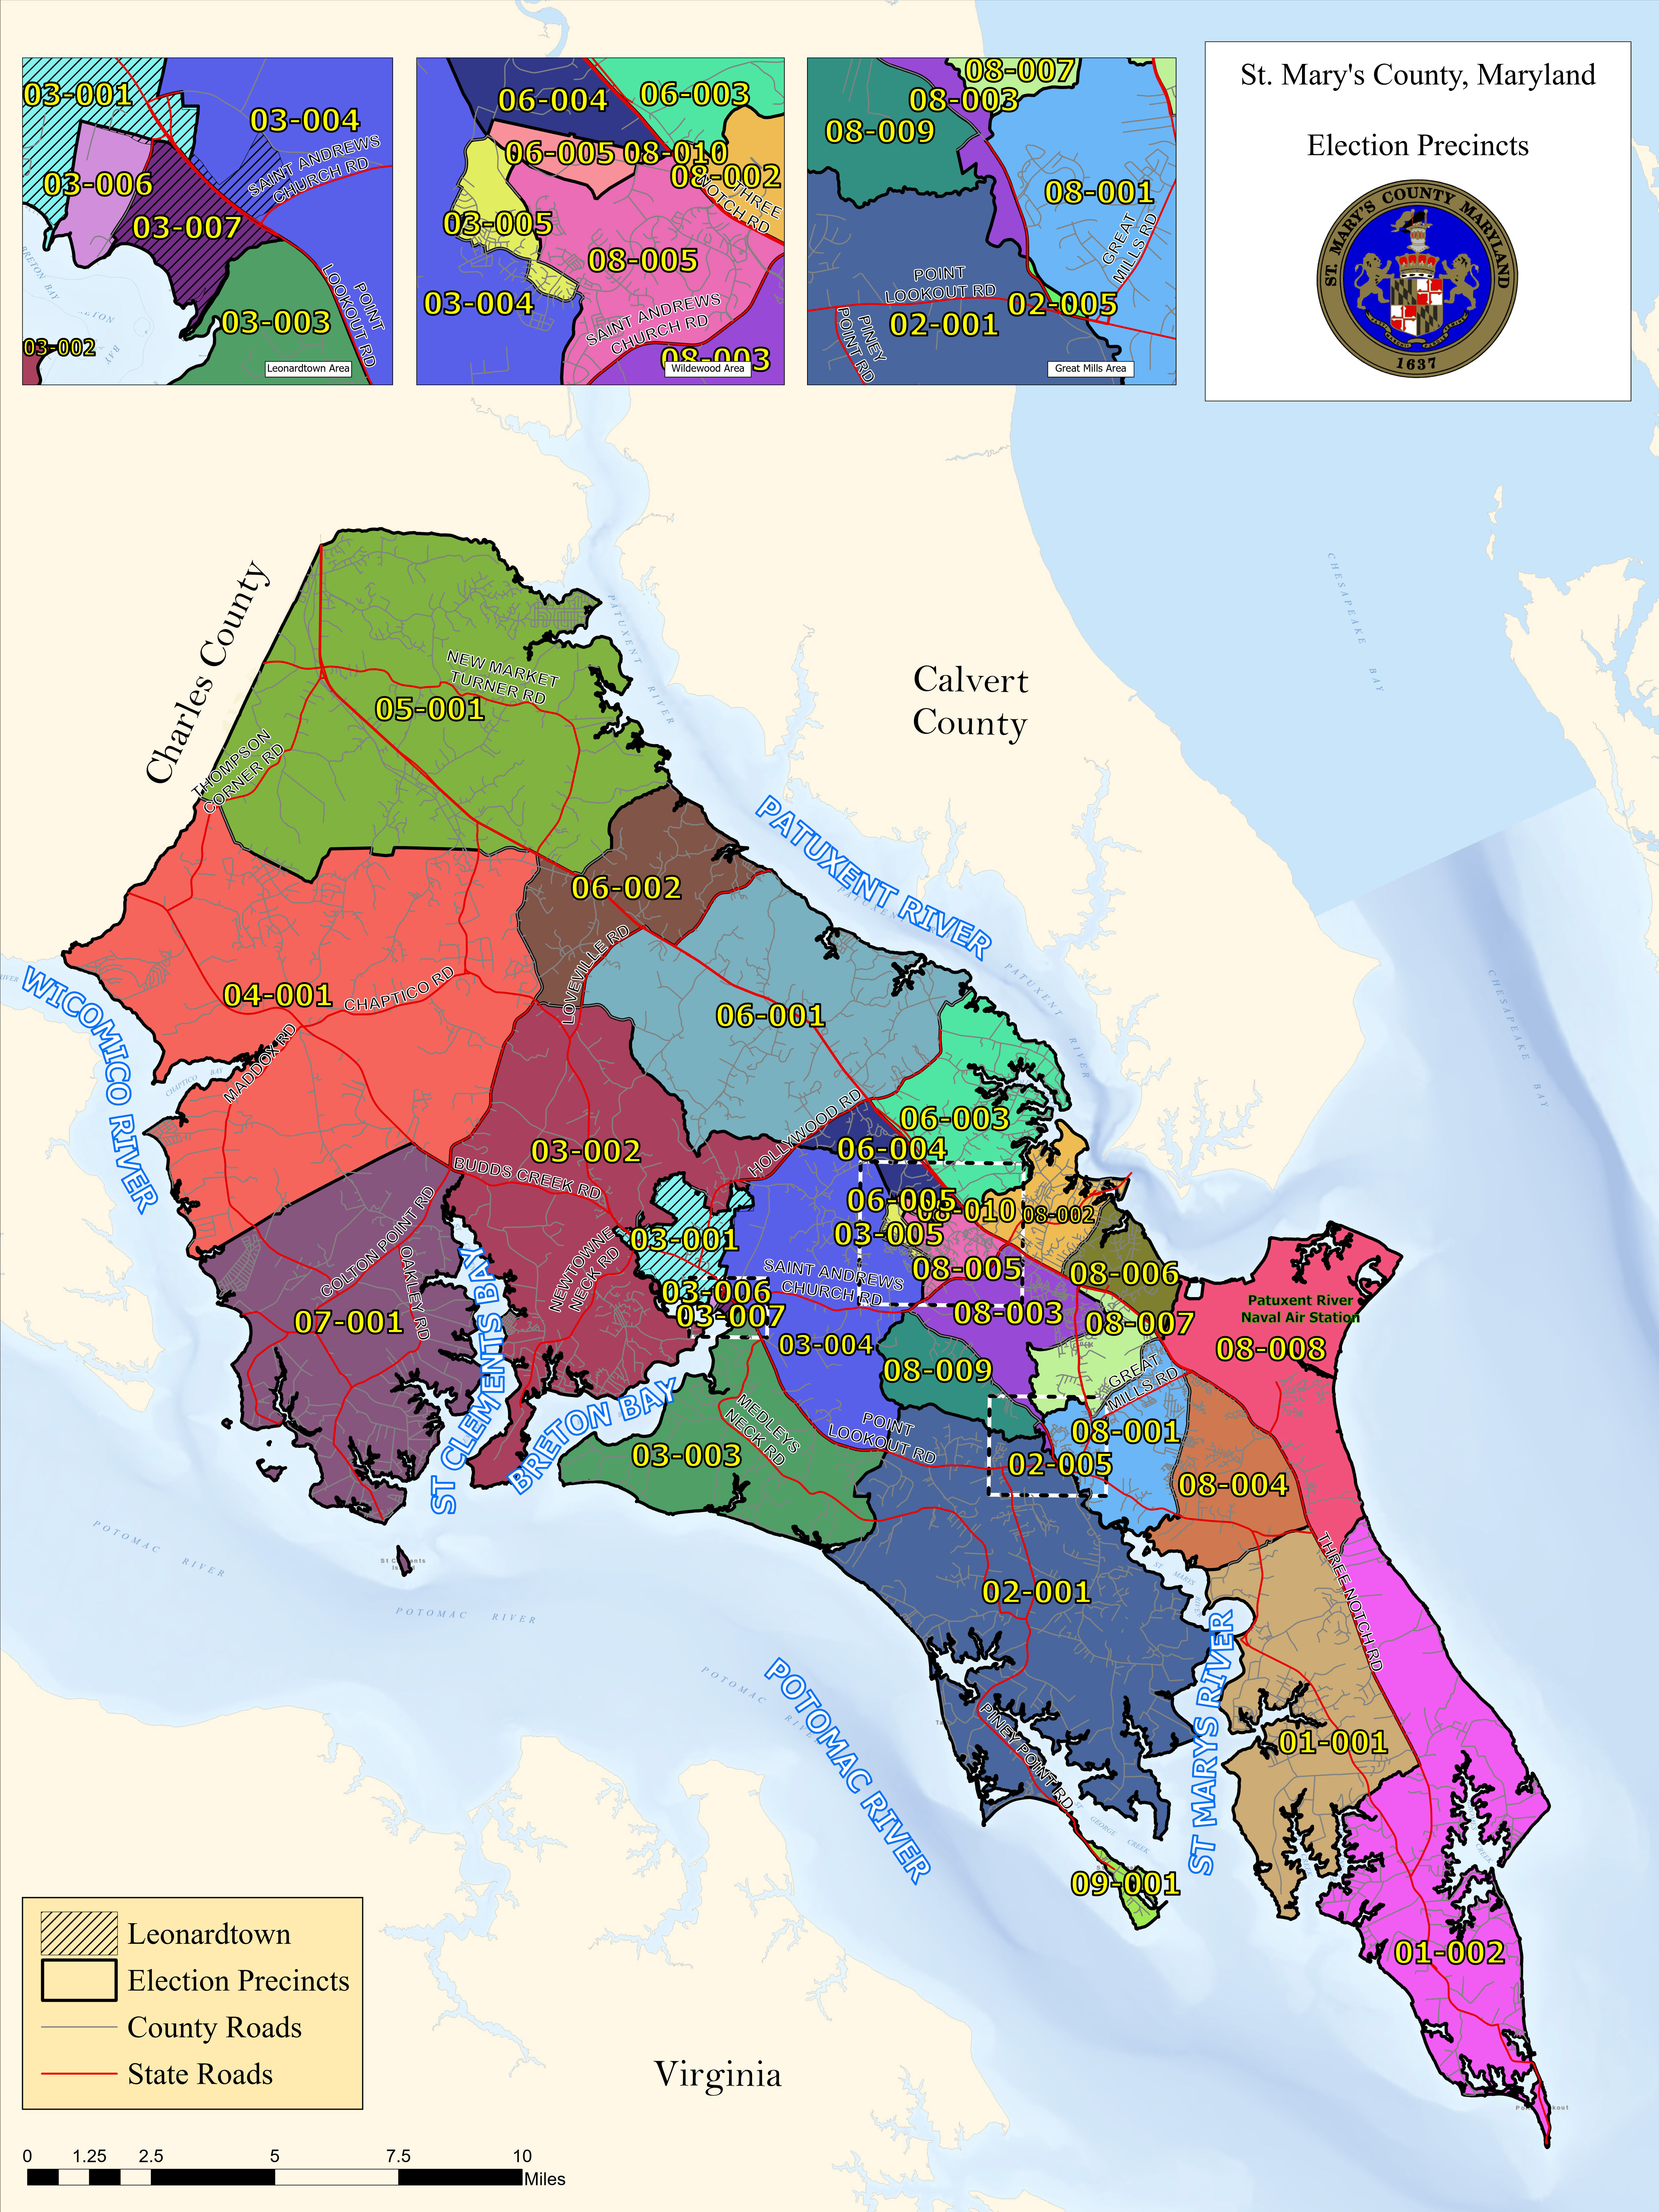 St. Mary's County, Maryland Election Precincts Map